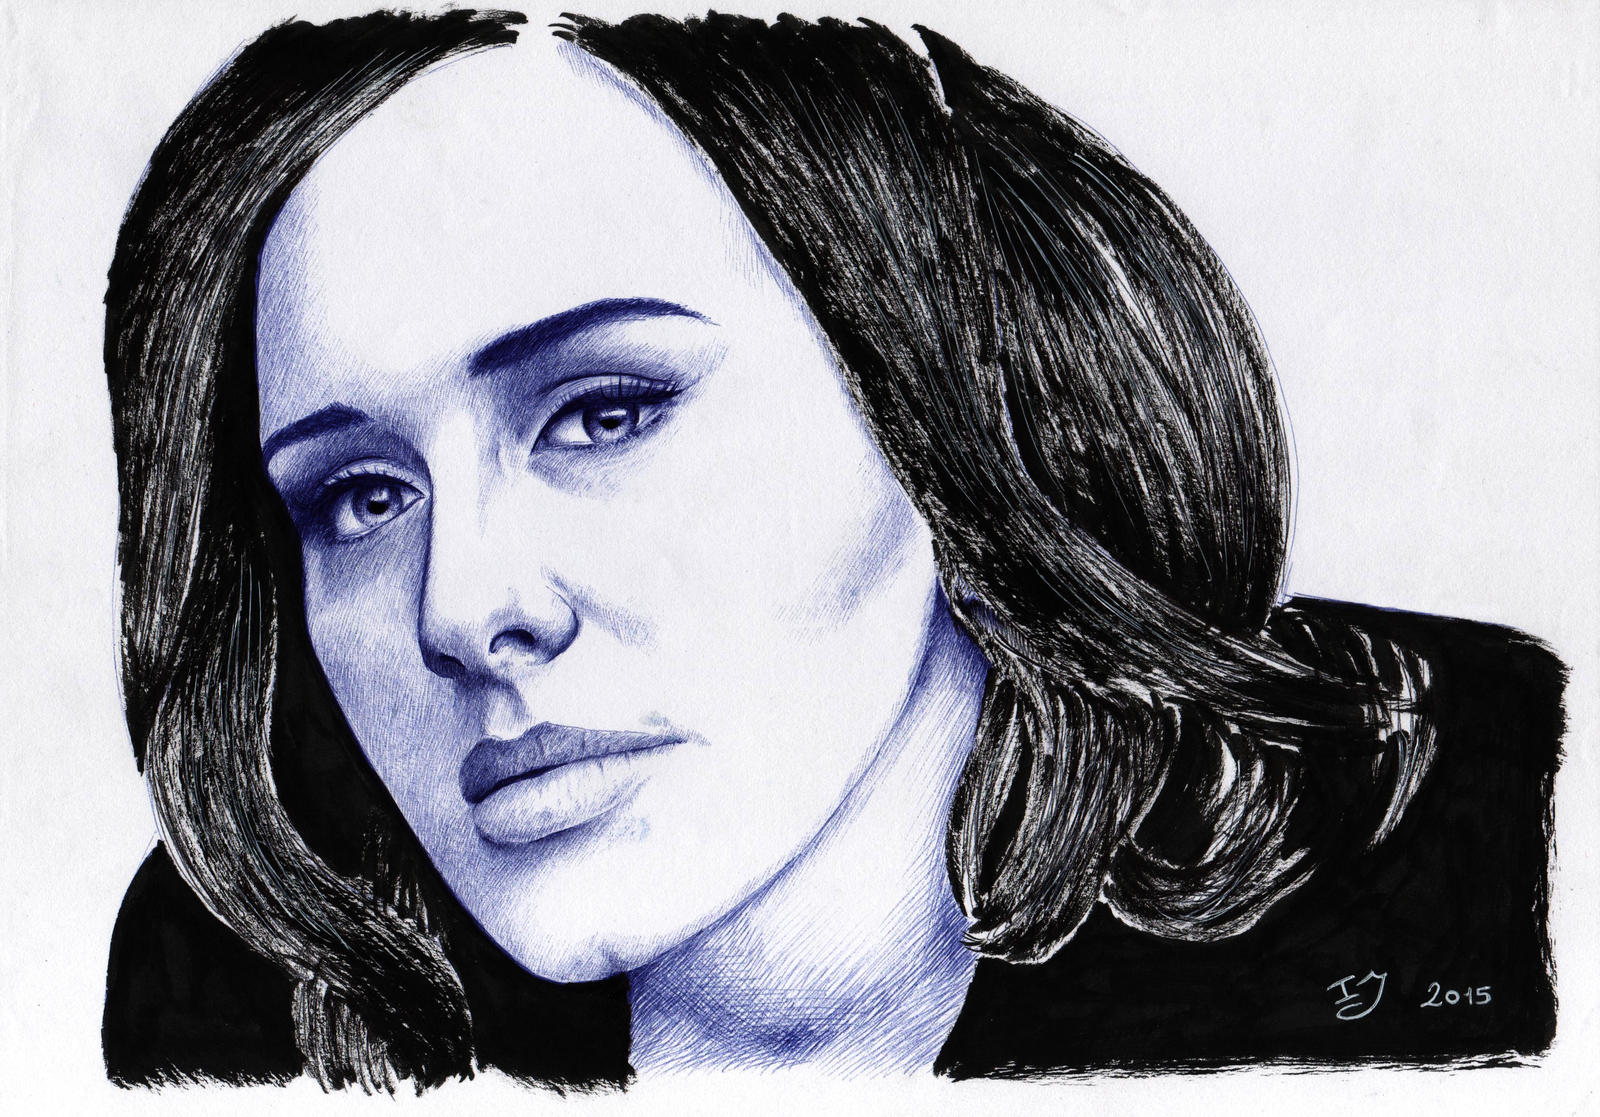 Adele Hello :) pen and paper by IvanJovanovic on DeviantArt